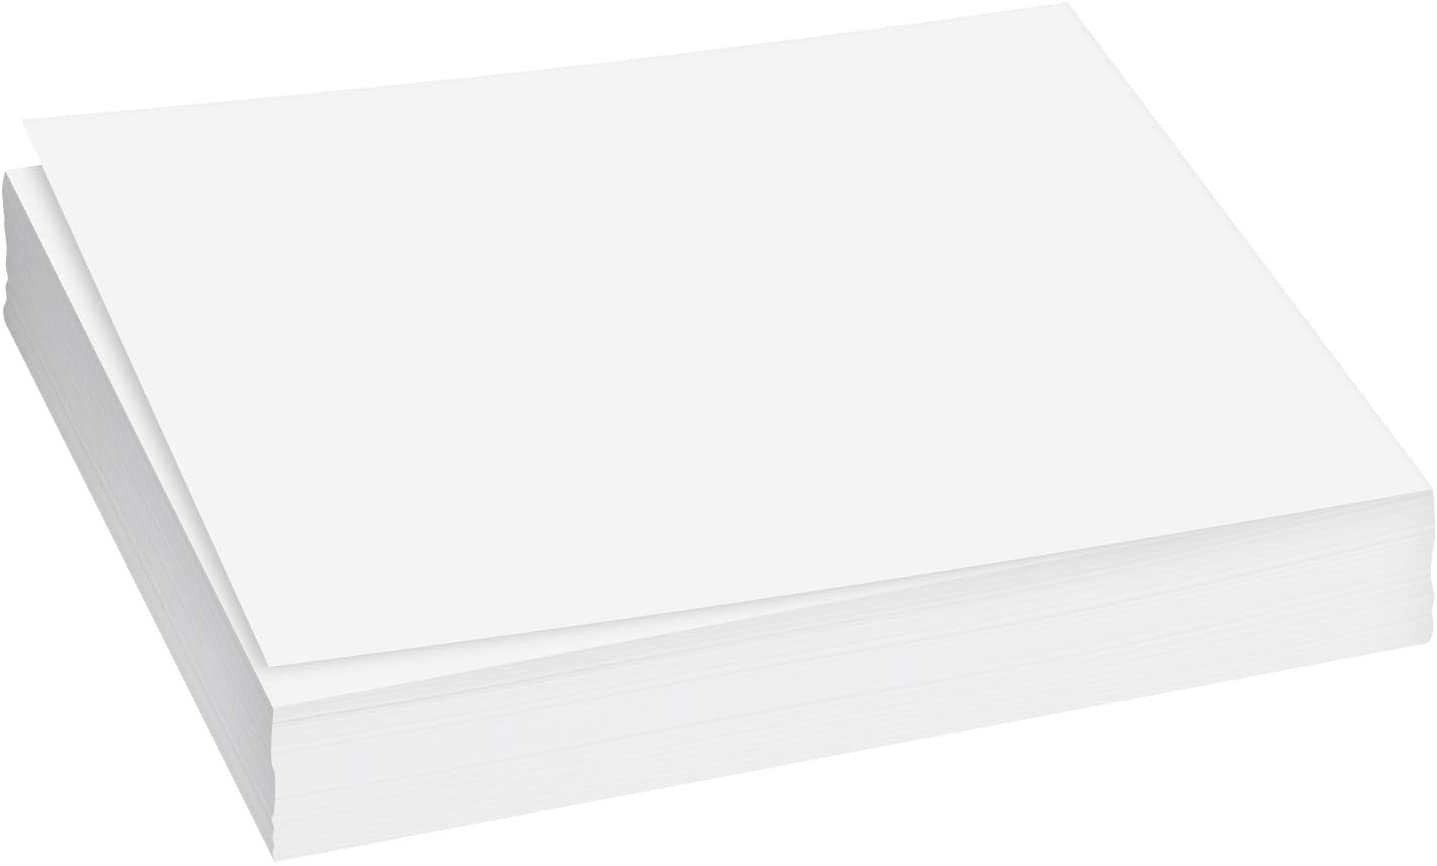 A4 White Paper | For Copy, Printing, Writing | 210 x 297 mm. (8.27" x 11.69" inches) | 24lb Bond Paper (90gsm) | 250 Sheets Per Pack - image 1 of 6